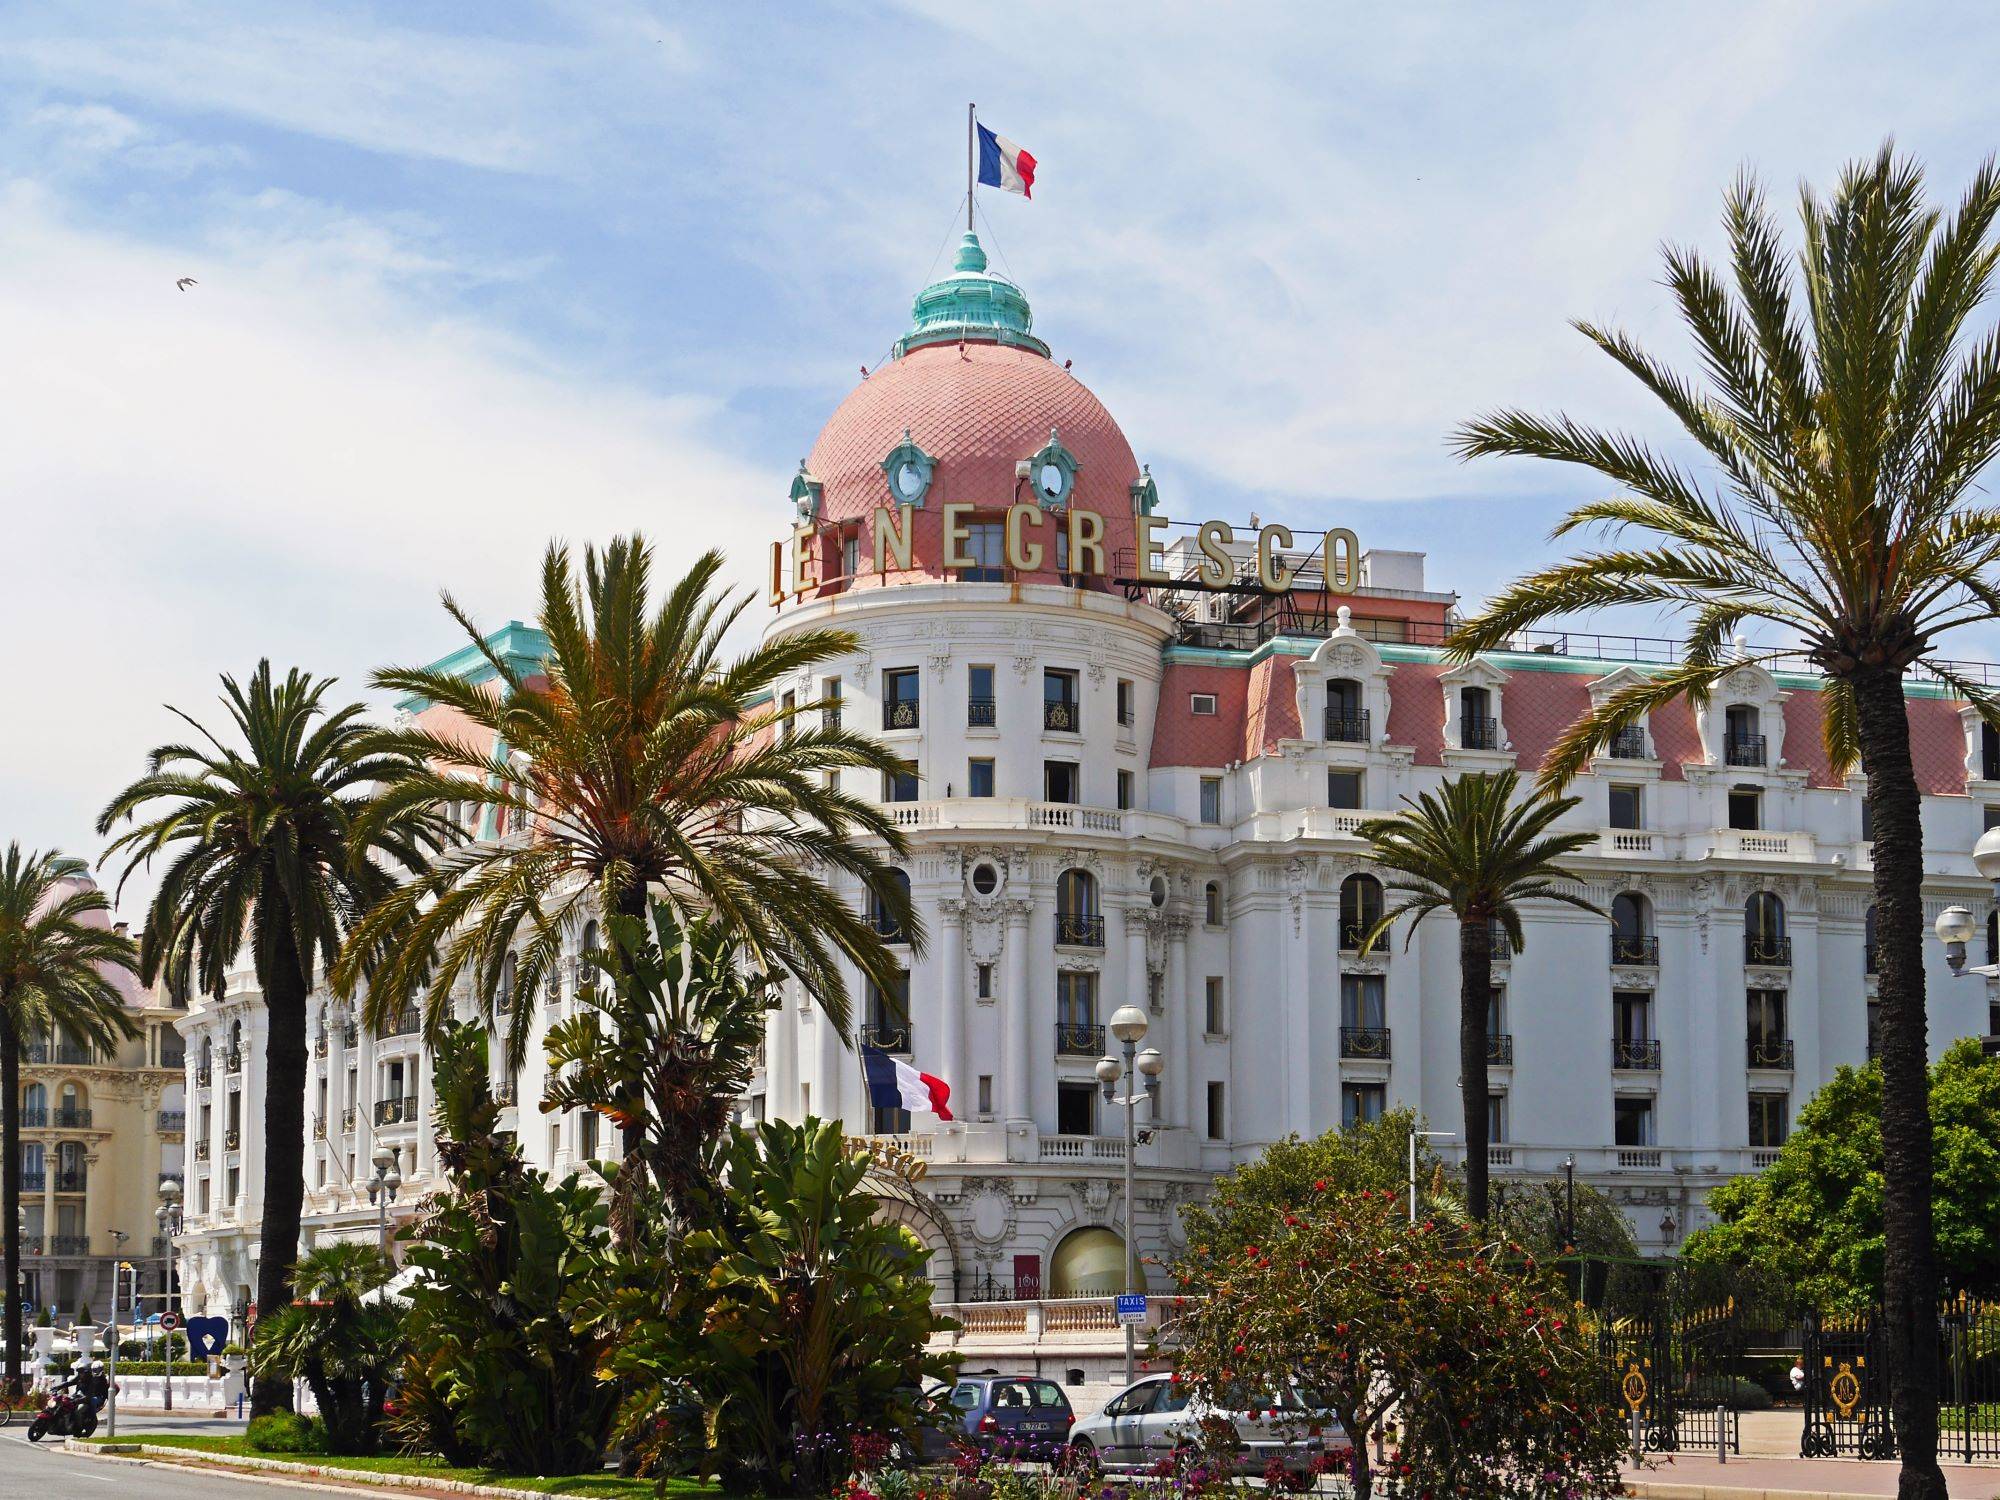 16 Best Things to Do in Nice, France - Hotel Negresco - Endless Travel Destinations